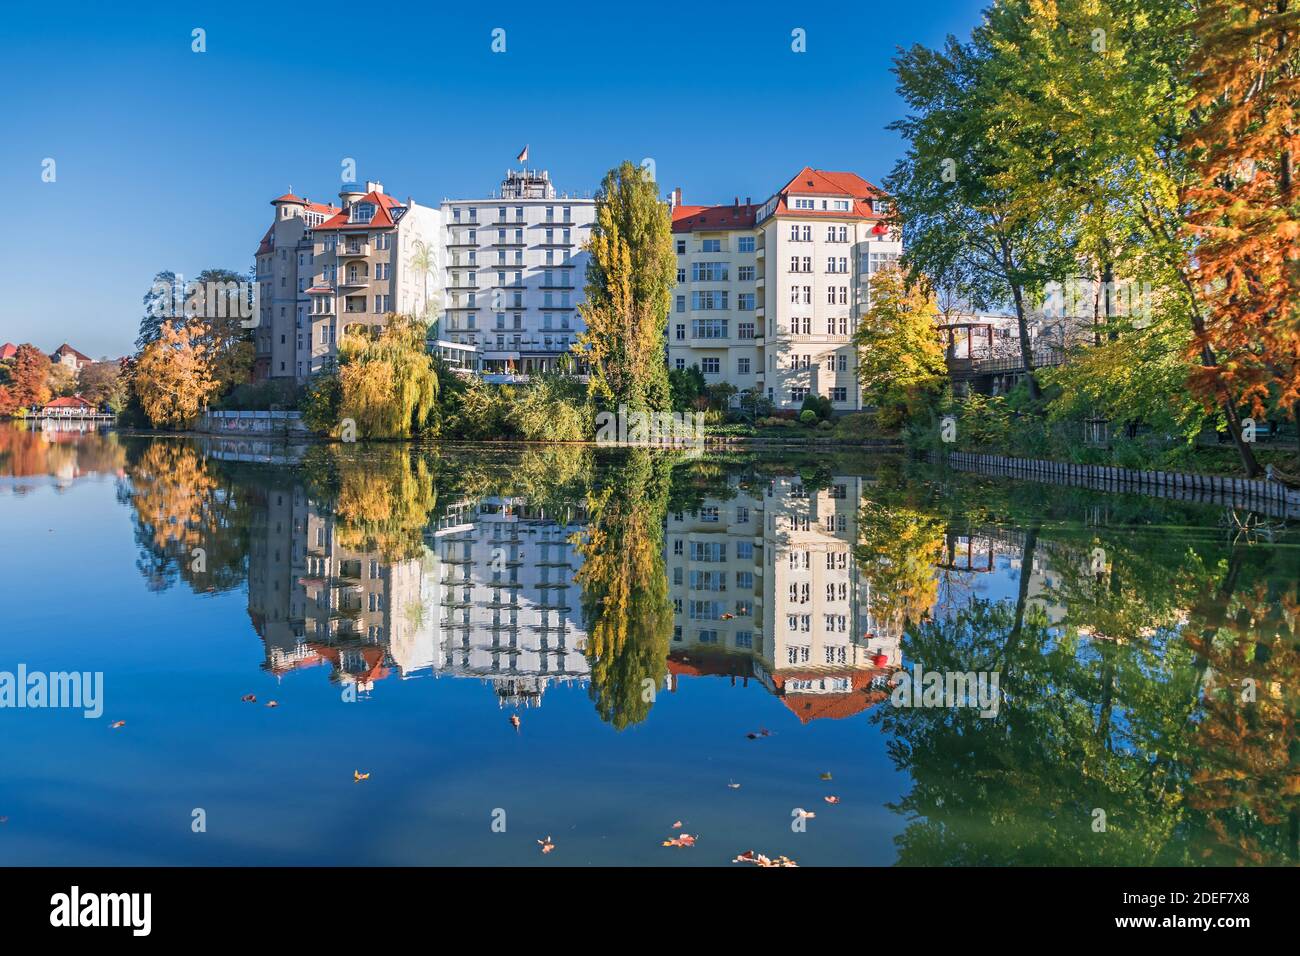 Berlin, Germany - November 7, 2020: Shore of Lake Lietzen with buildings of Haus See-Eck, Belle-Etage, Pension Kammern am See and Ringhotel Seehof Stock Photo